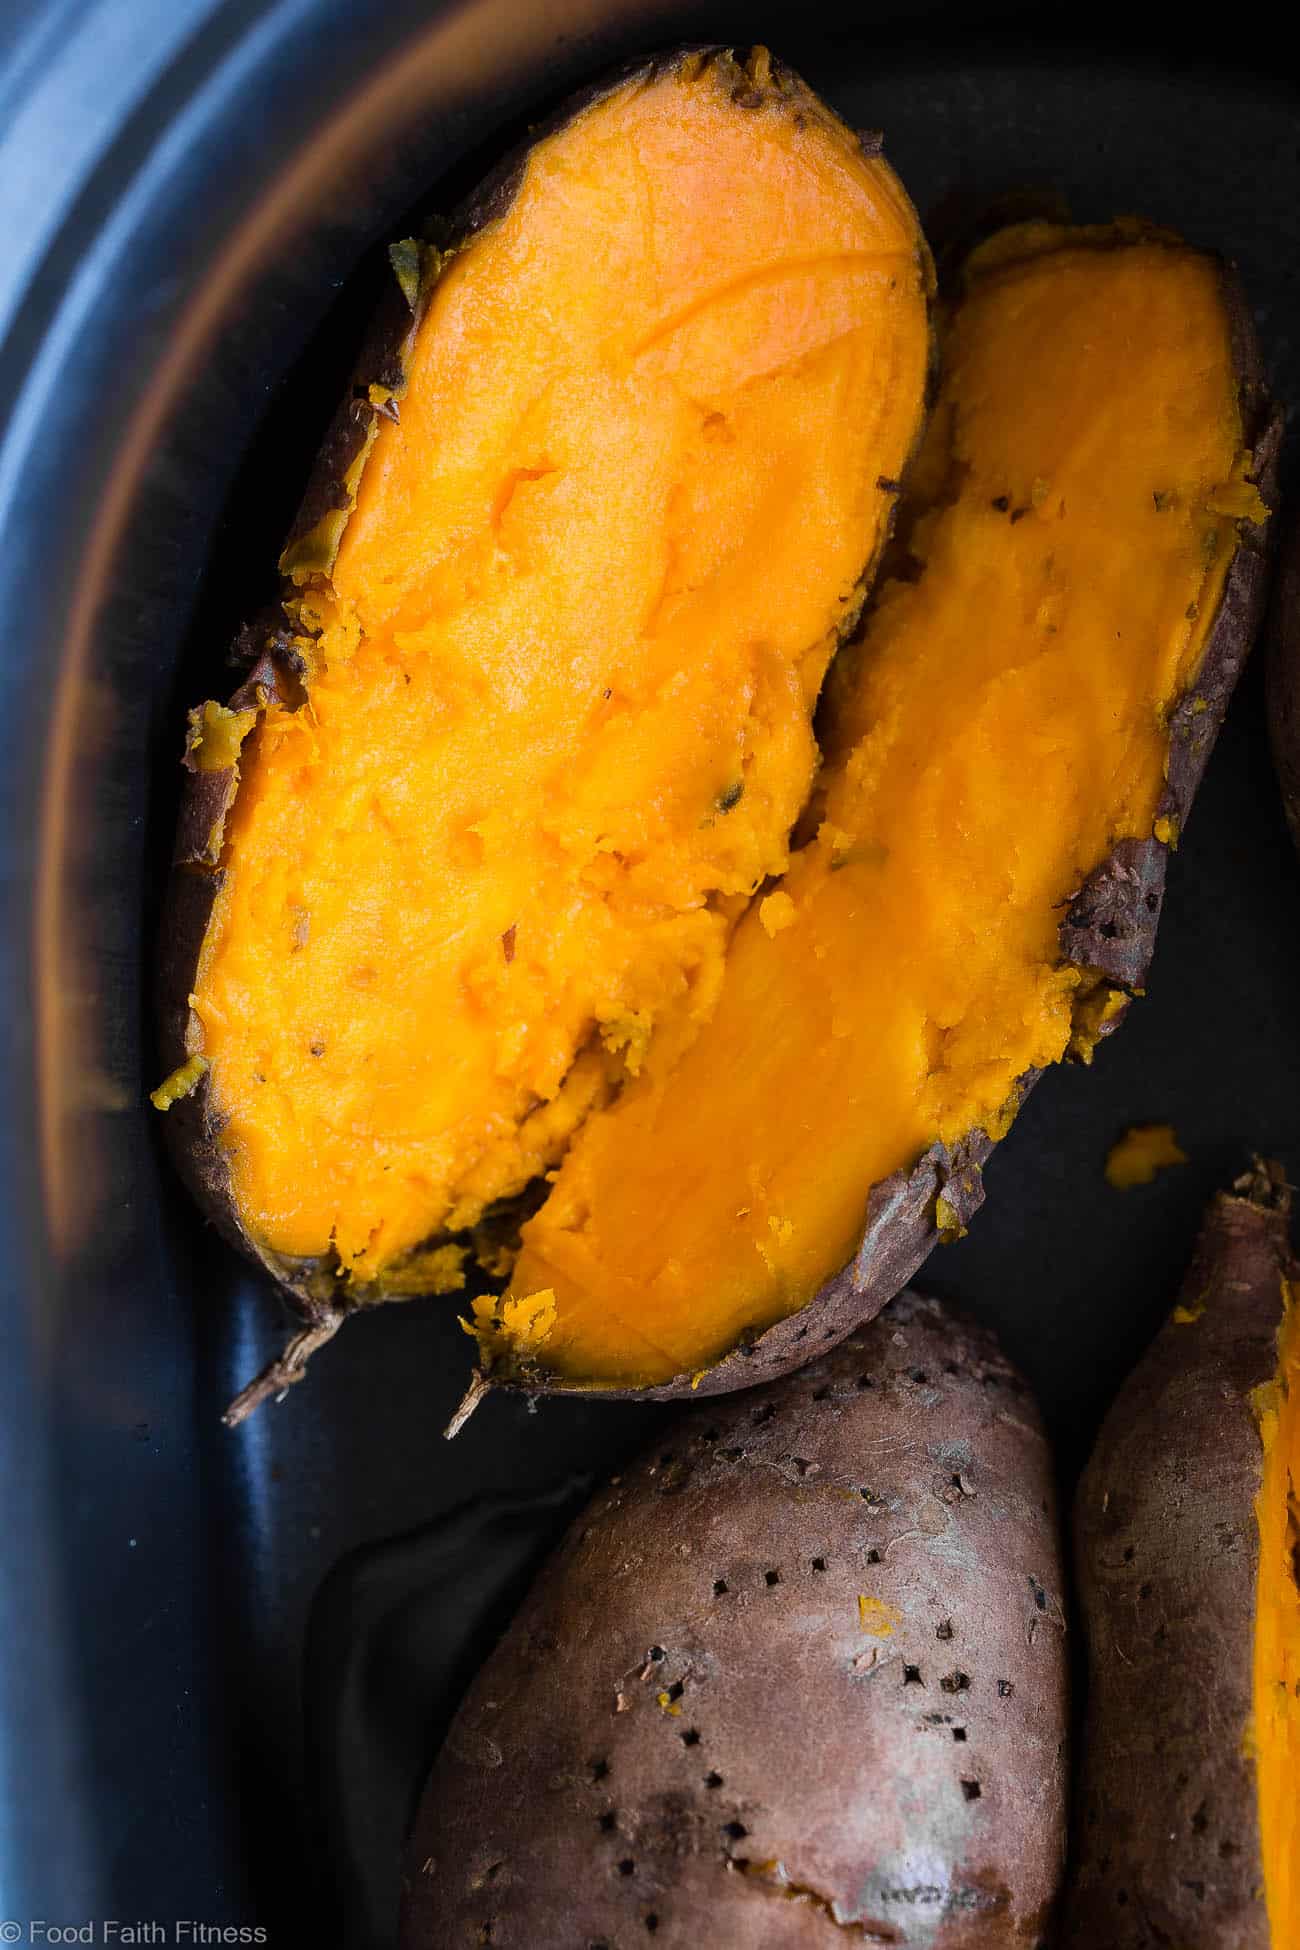 How to Cook Sweet Potatoes in the Crock Pot - Let the slow cooker do all the work for you! These sweet potatoes are SO easy and come out perfect EVERY TIME! A healthy, paleo, vegan and whole30 side dish! | #Foodfaithfitness | #Paleo #Glutenfree #Healthy #Slowcooker #Crockpot